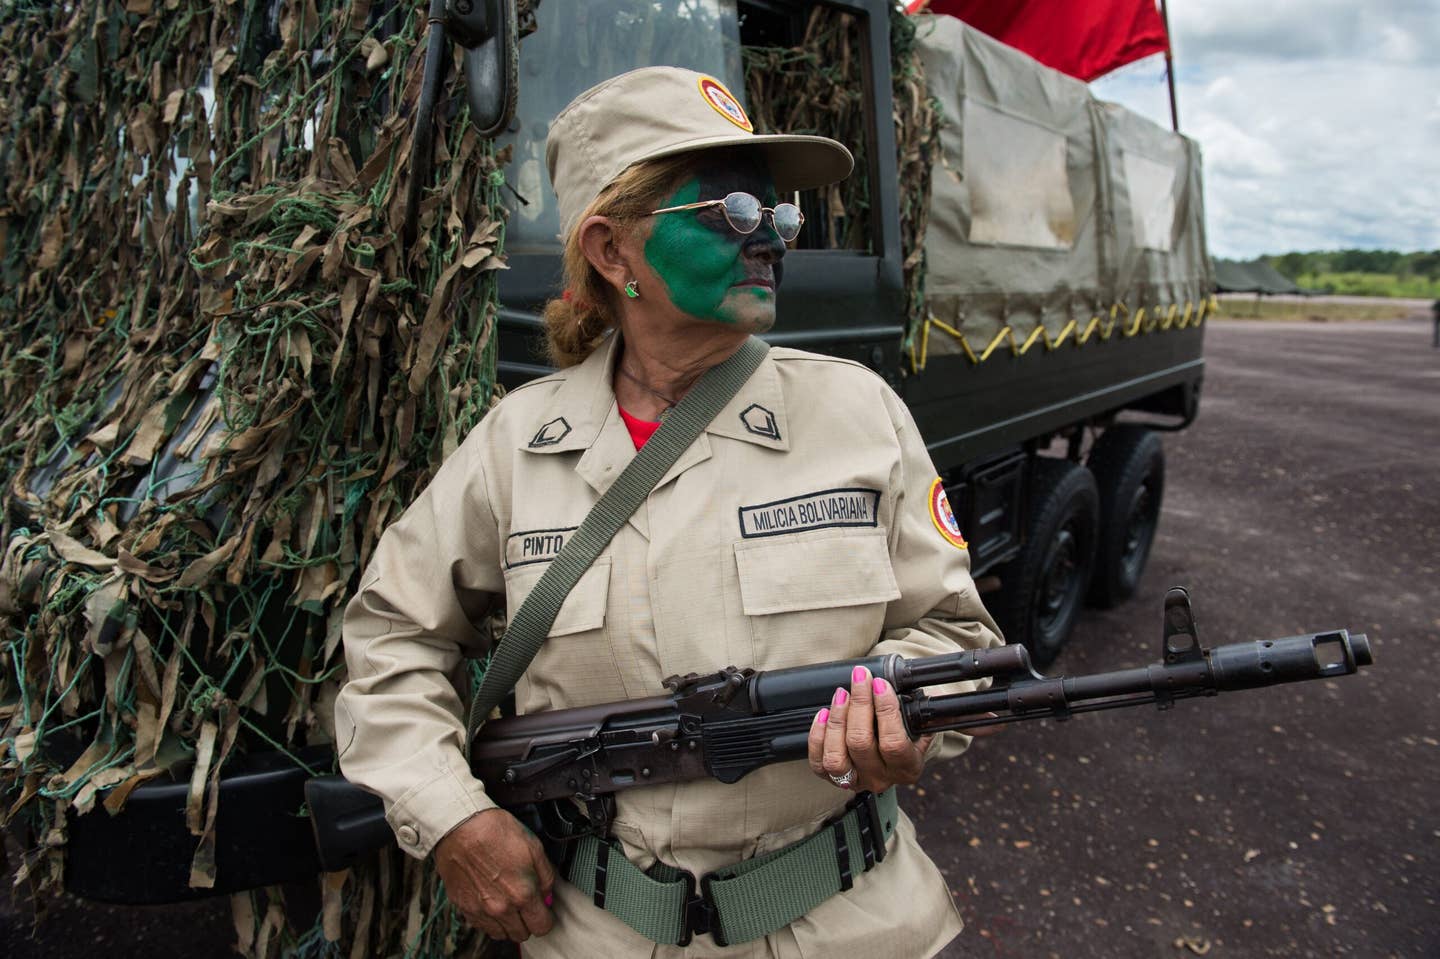 A member of the Venezuelan Army reserve is pictured before a military parade in Tumeremo, Bolivar State, in Venezuela, during a previous period of tensions with Guyana in 2015. <em>Photo by FEDERICO PARRA/AFP via Getty Images</em>